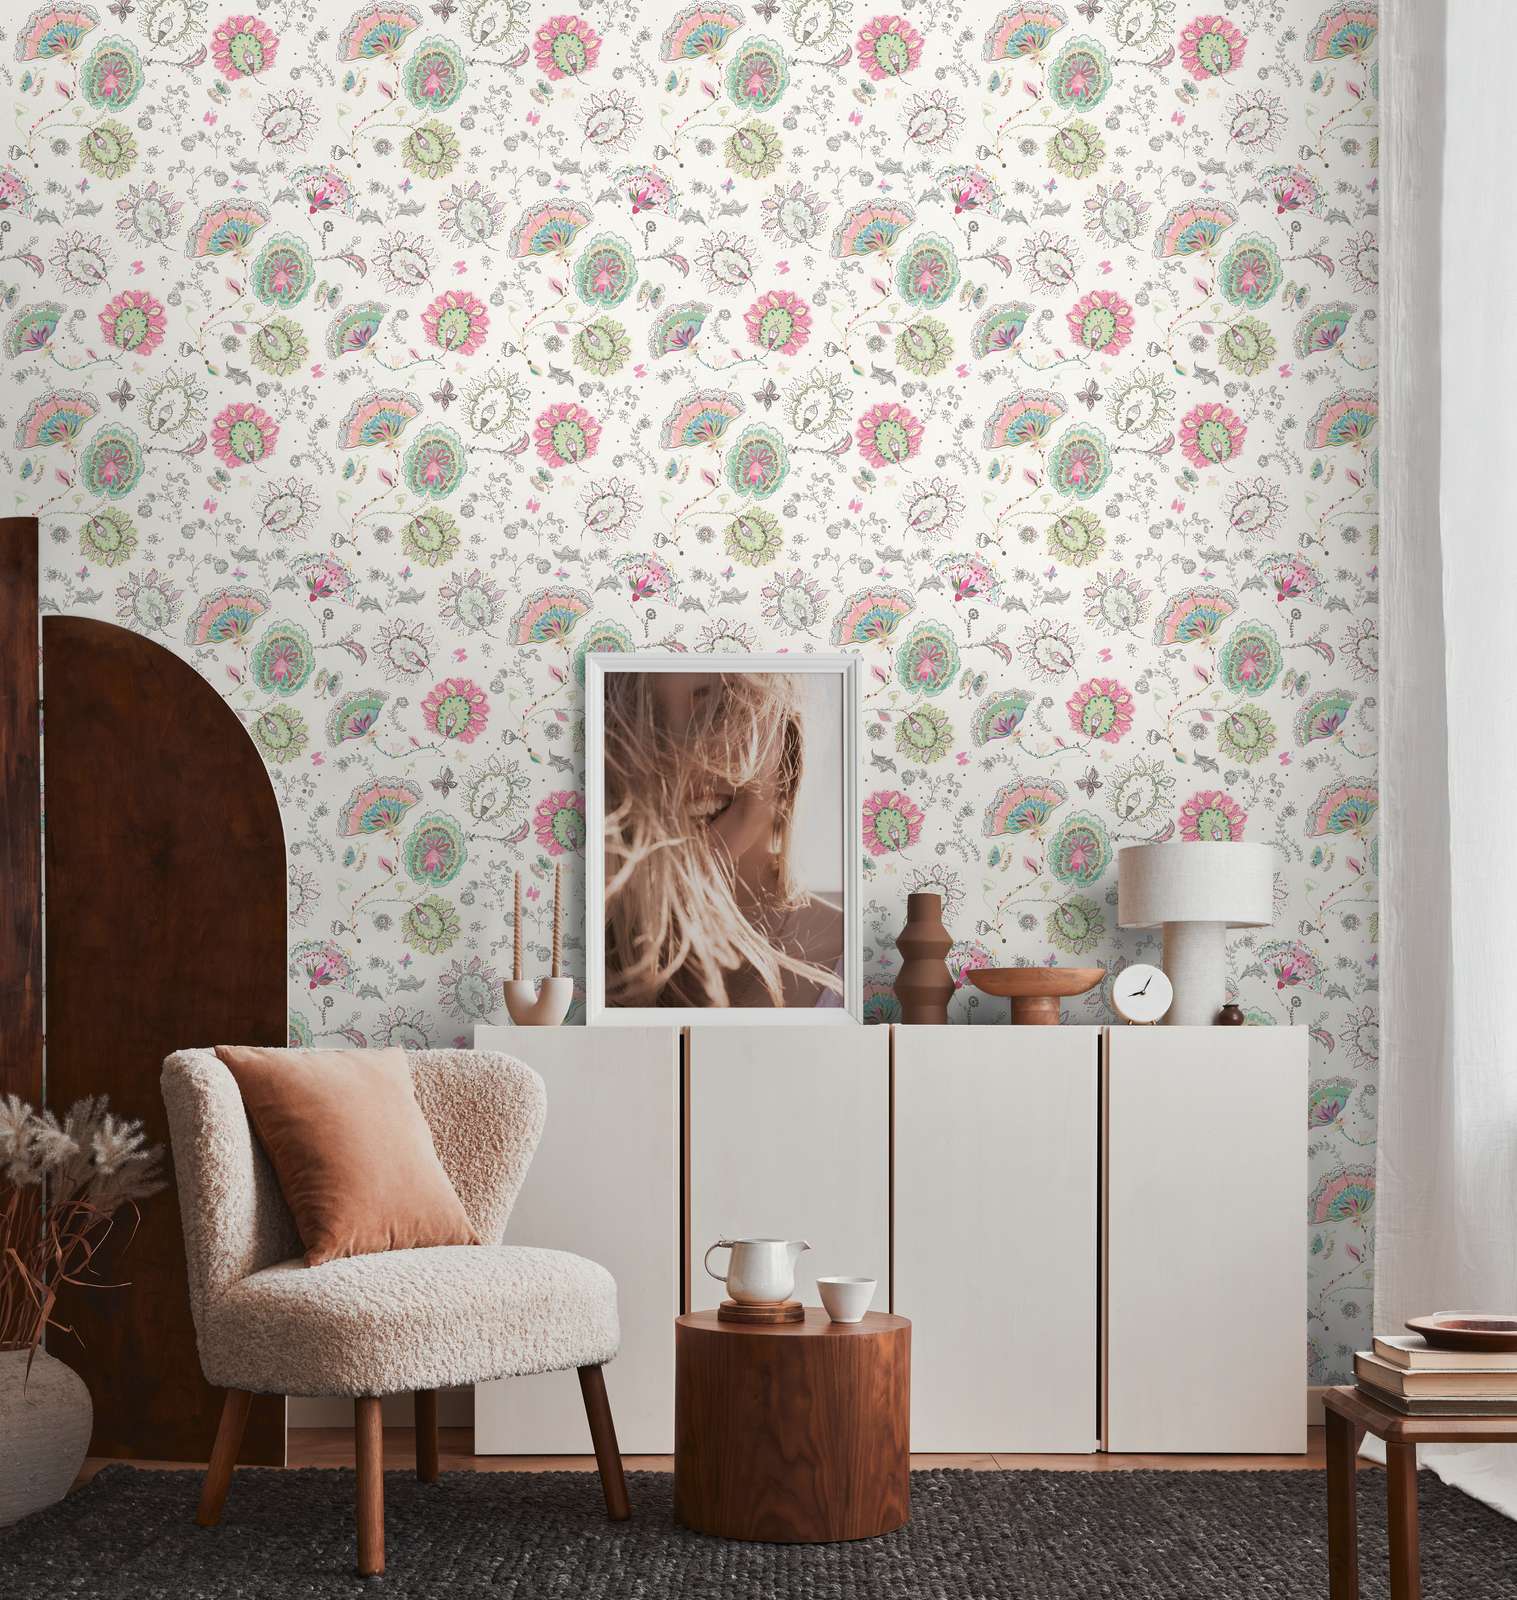             Floral pattern wallpaper in bold colours - cream, green, pink
        